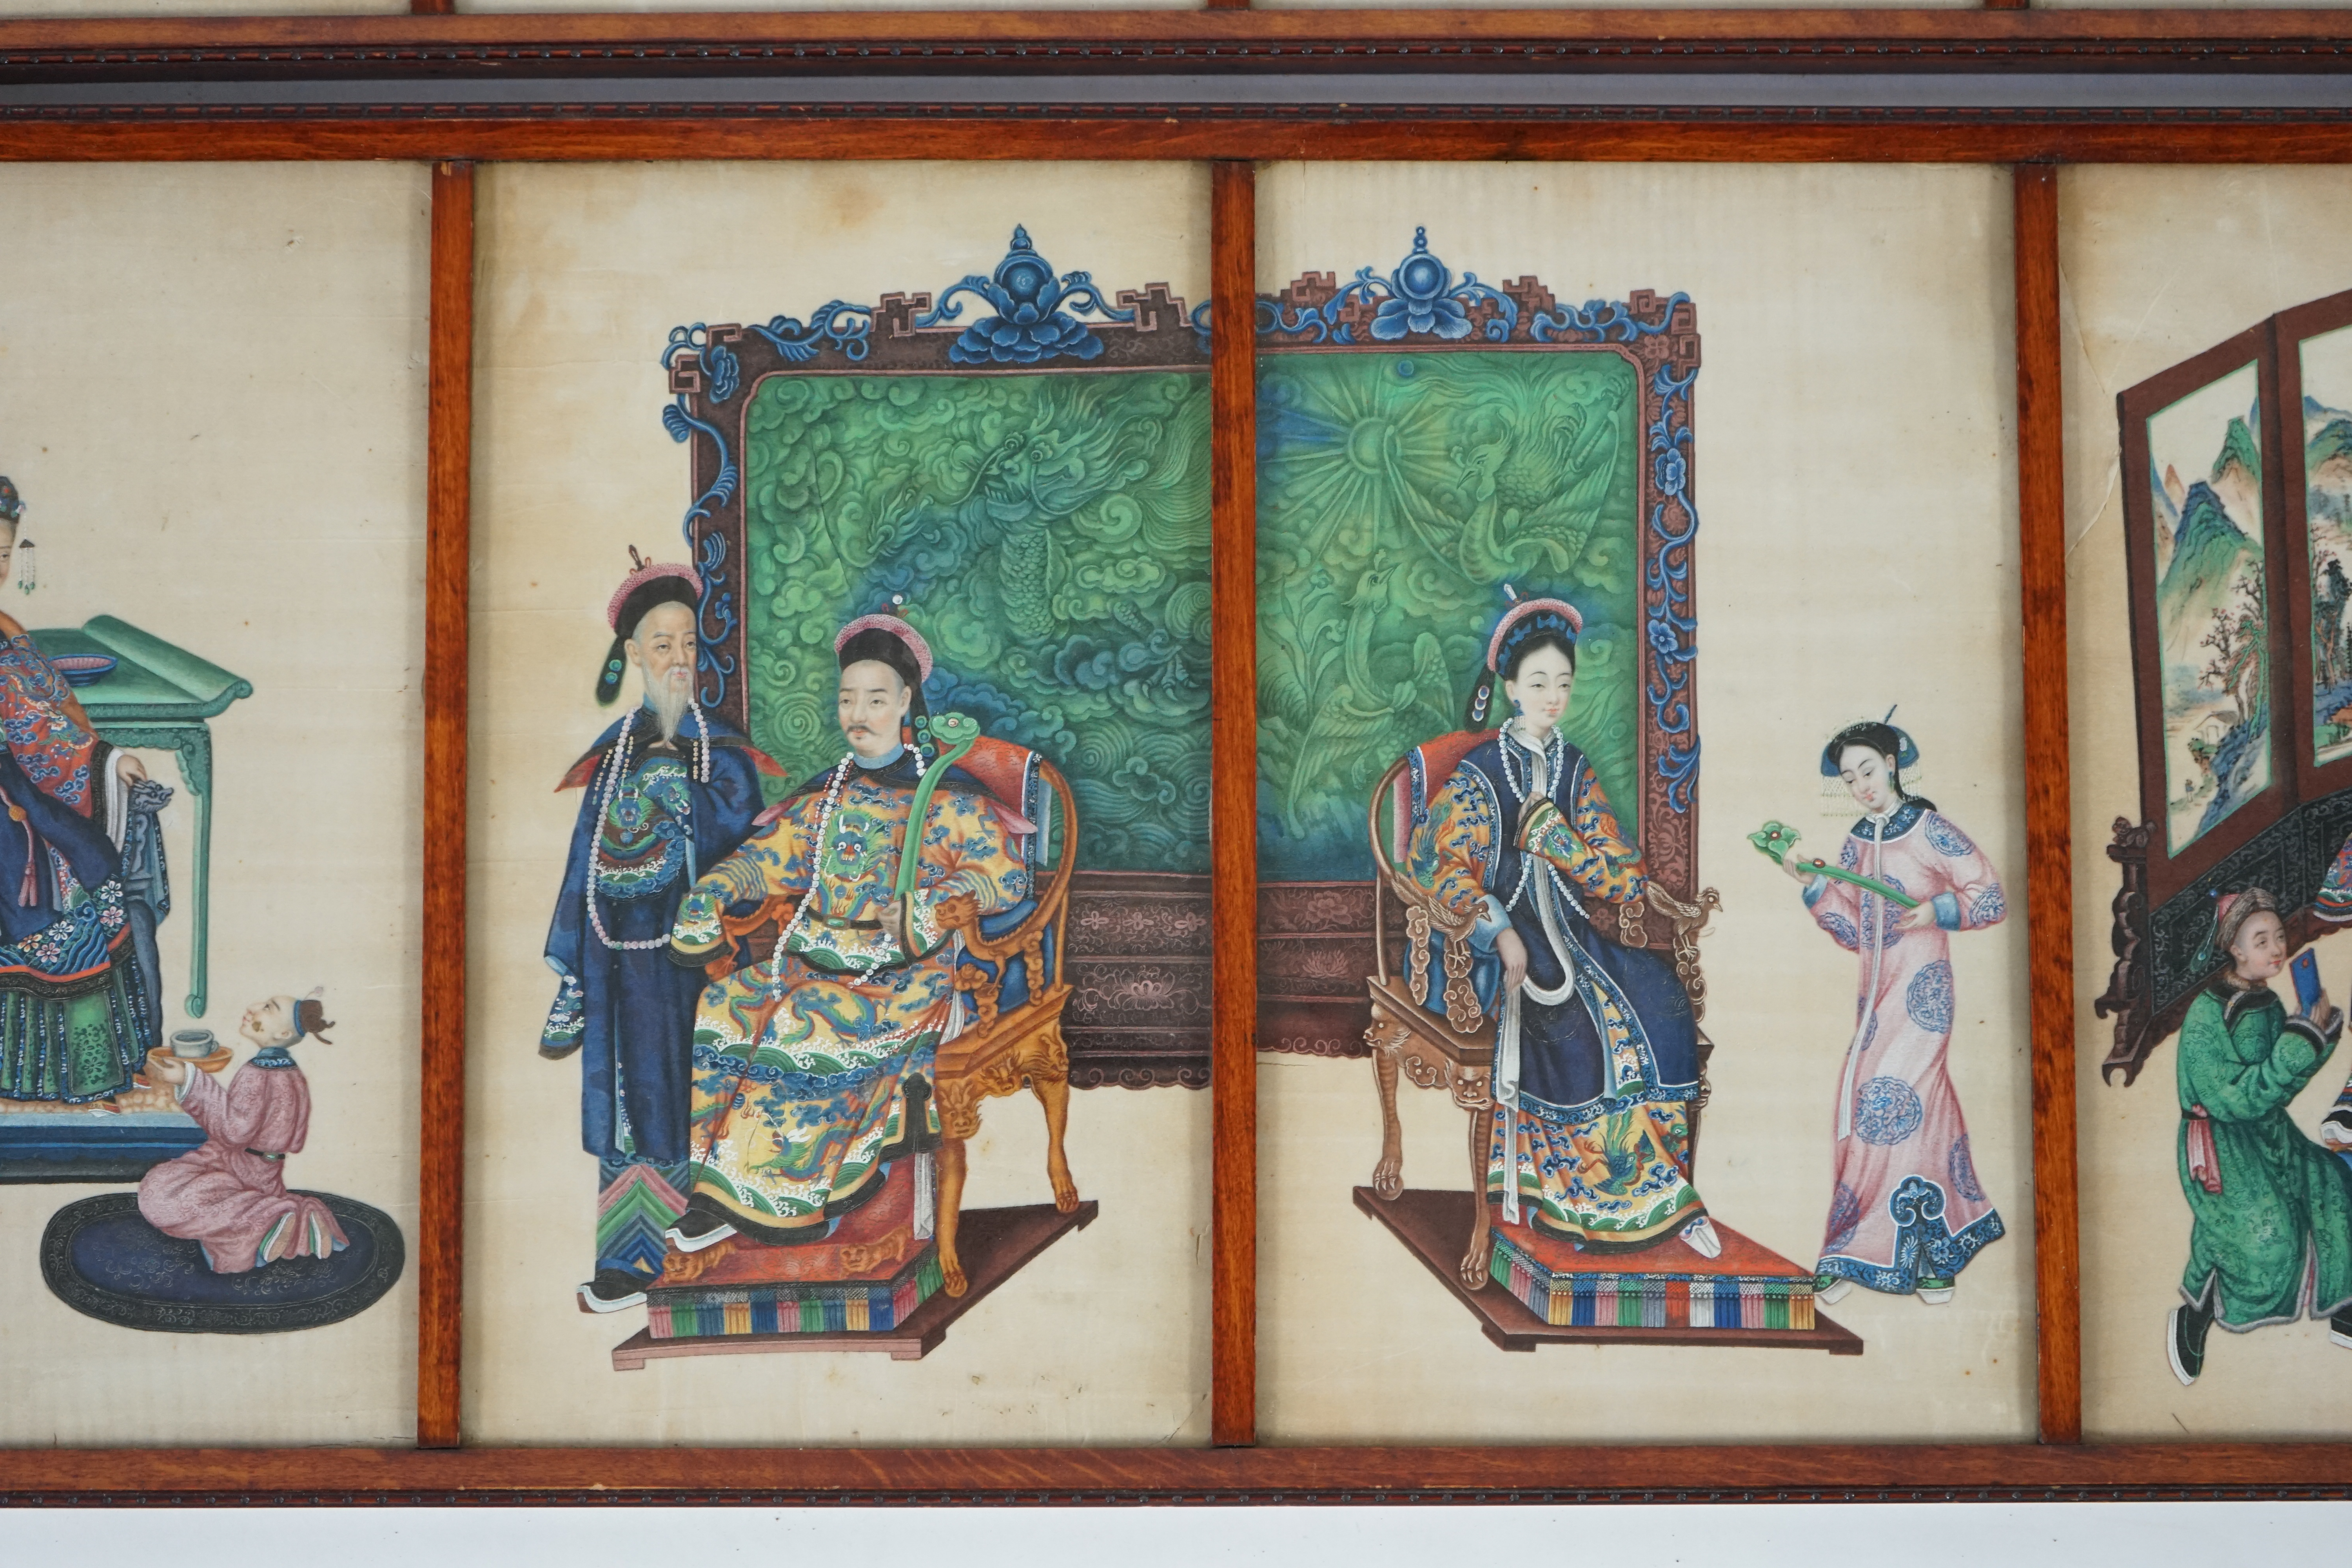 A set of eight Chinese pith paintings of an emperor and empress, court dignitaries and attendants, mid 19th century